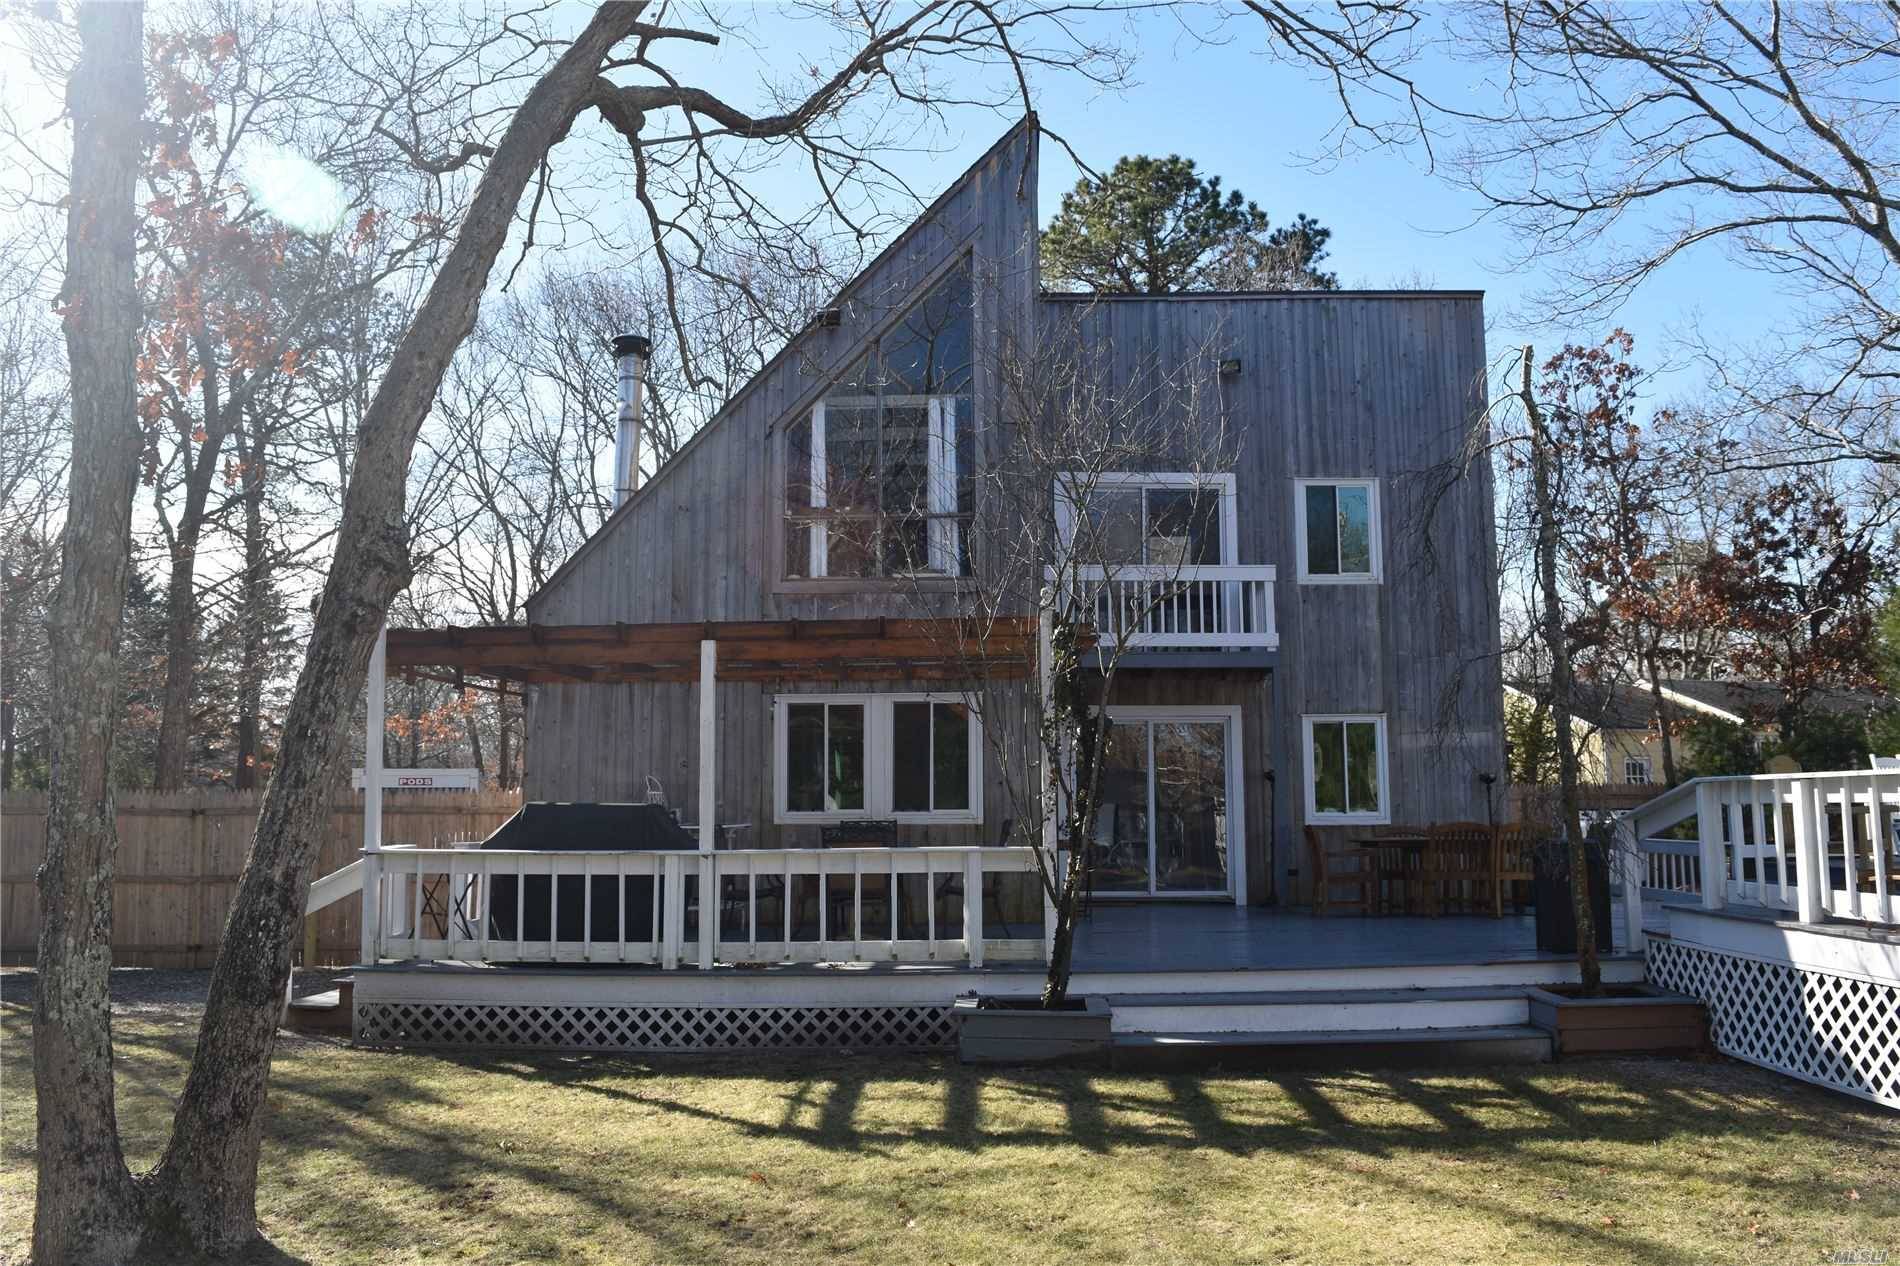 South of the Highway, Vertical Cedar, Contemporary Saltbox home.